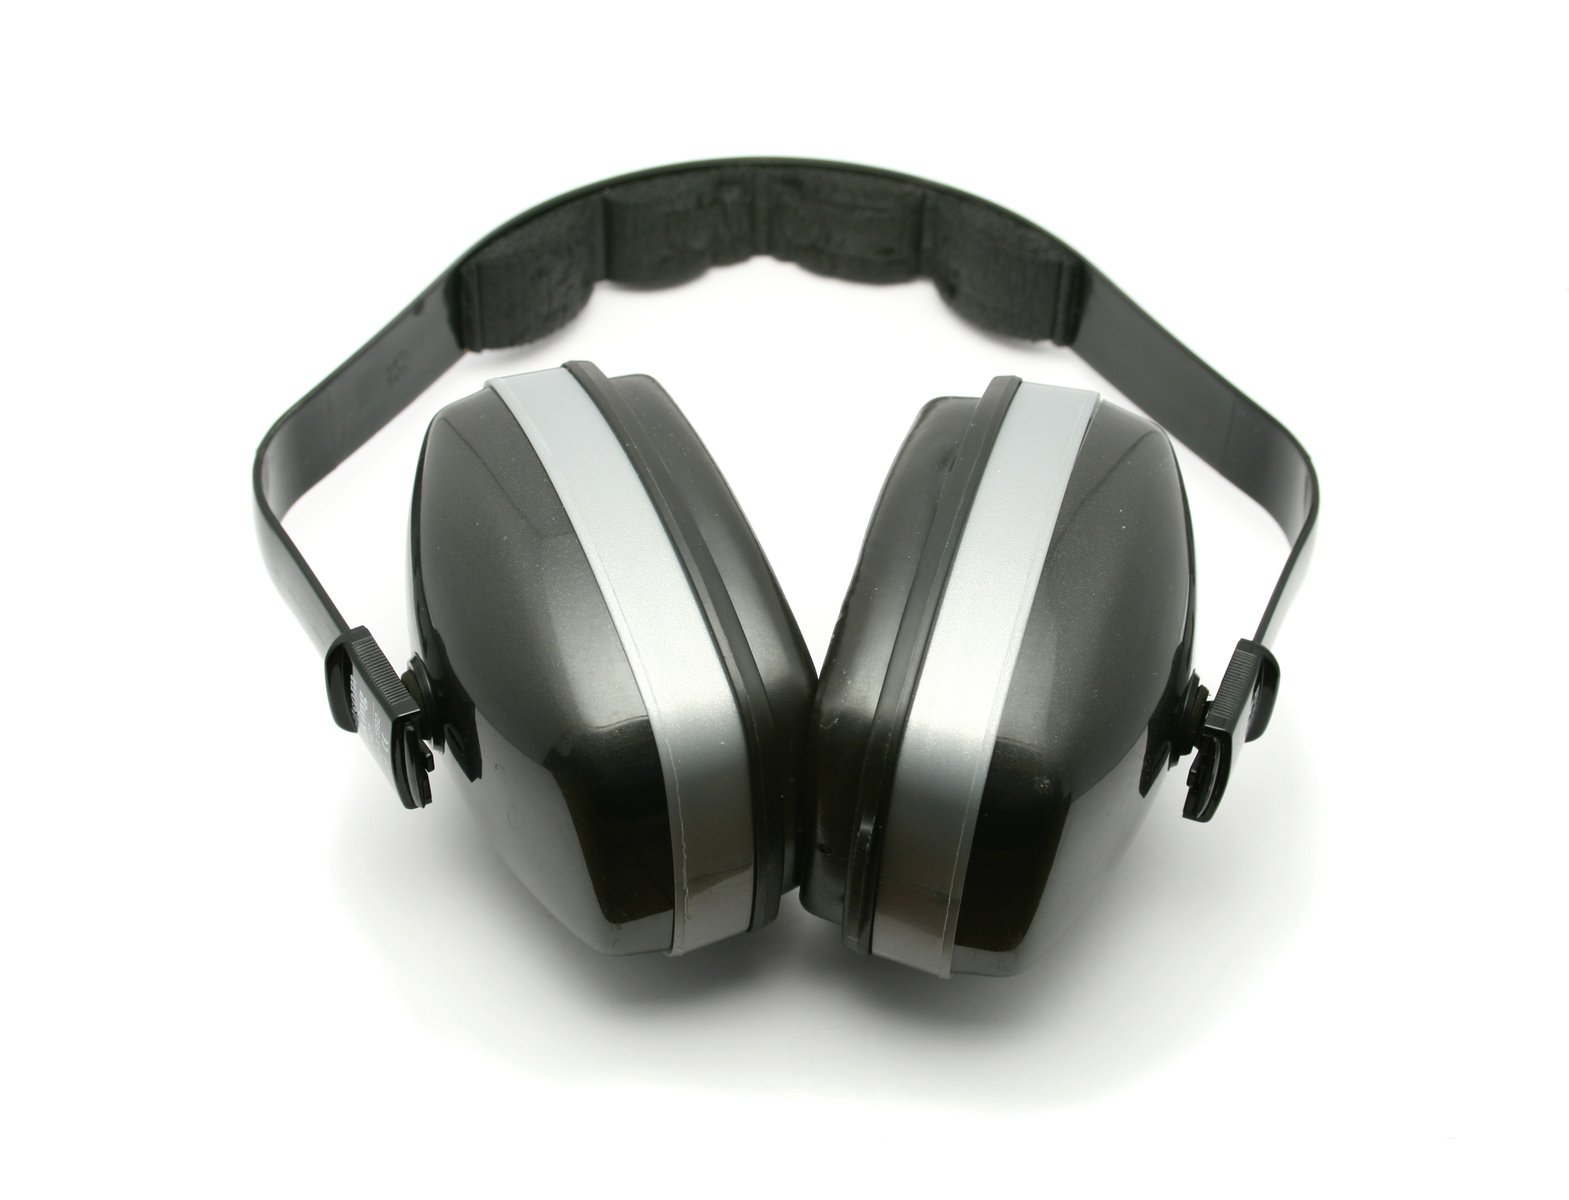 a pair of electronic headphones that have two headsets on it